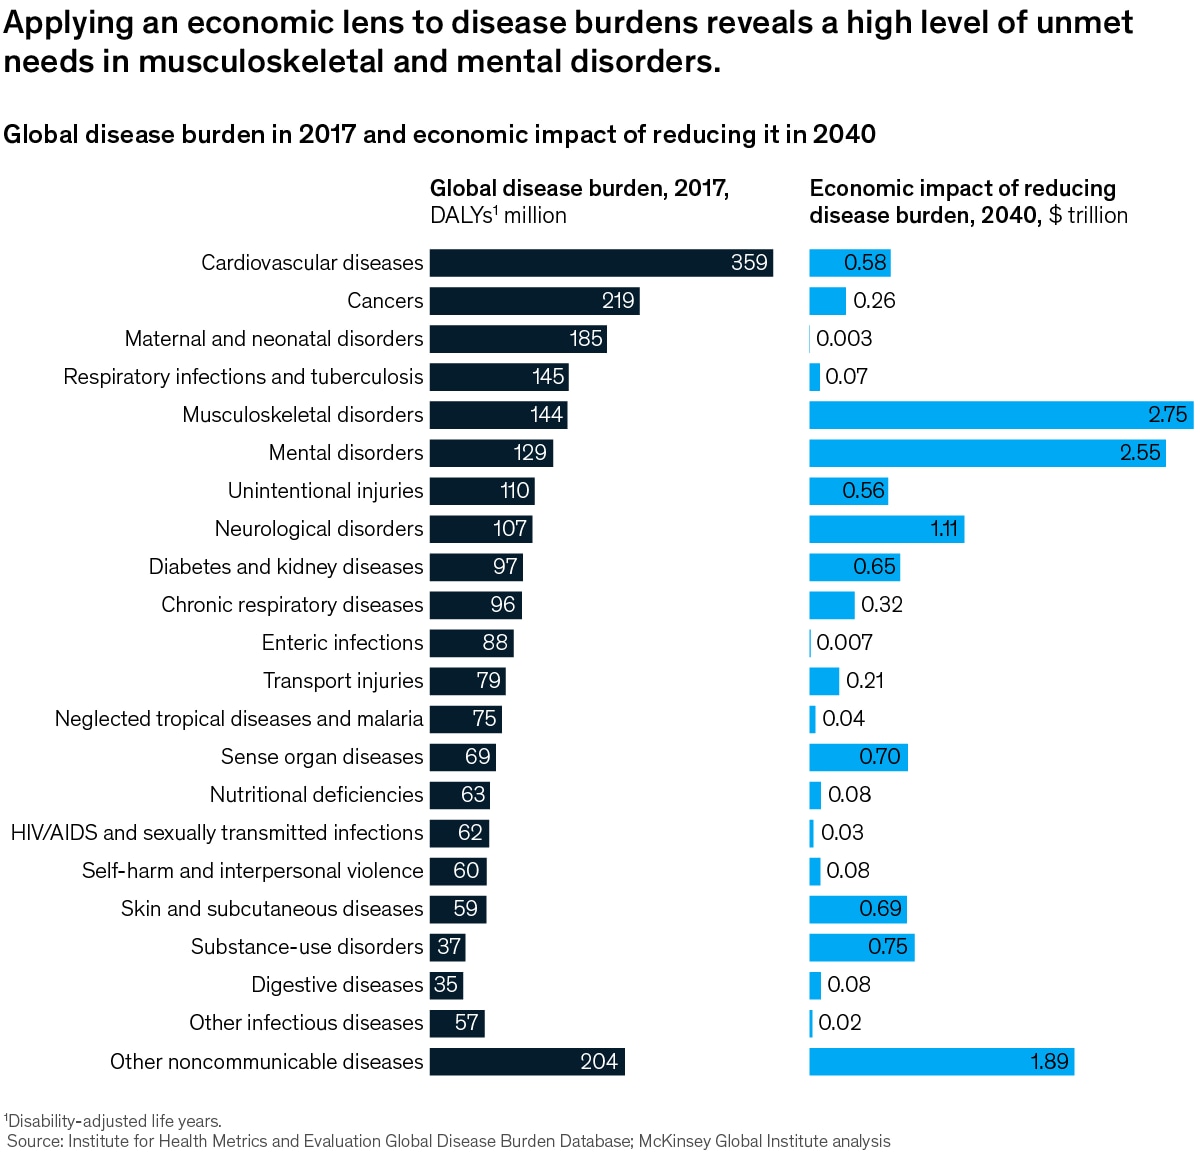 Chart showing that applying an economic lens to disease burdens reveals a high level of unmet needs in musculoskeletal and mental disorders